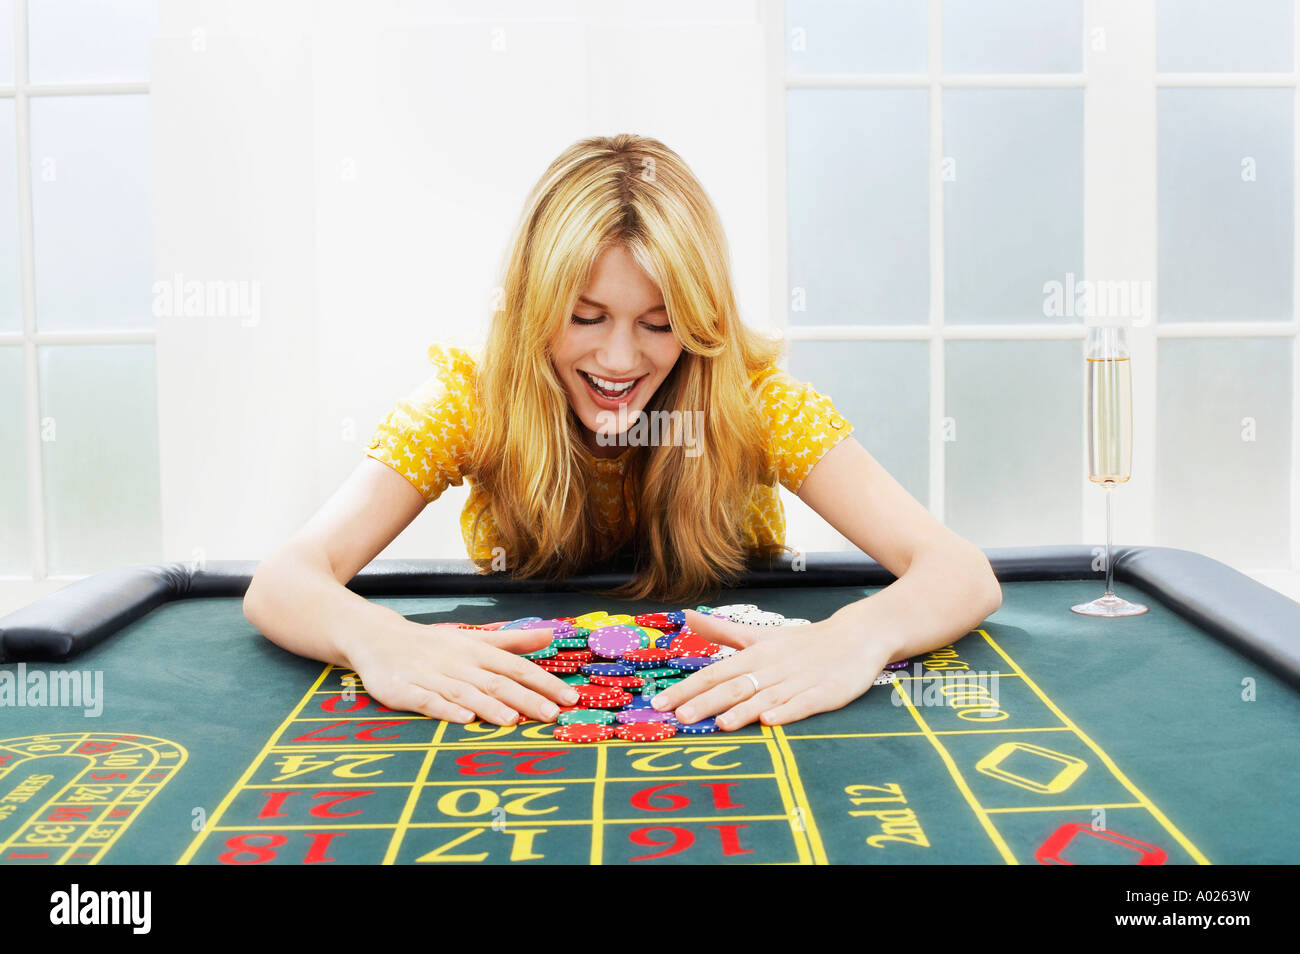 Happy woman at roulette table collecting chips Stock Photo